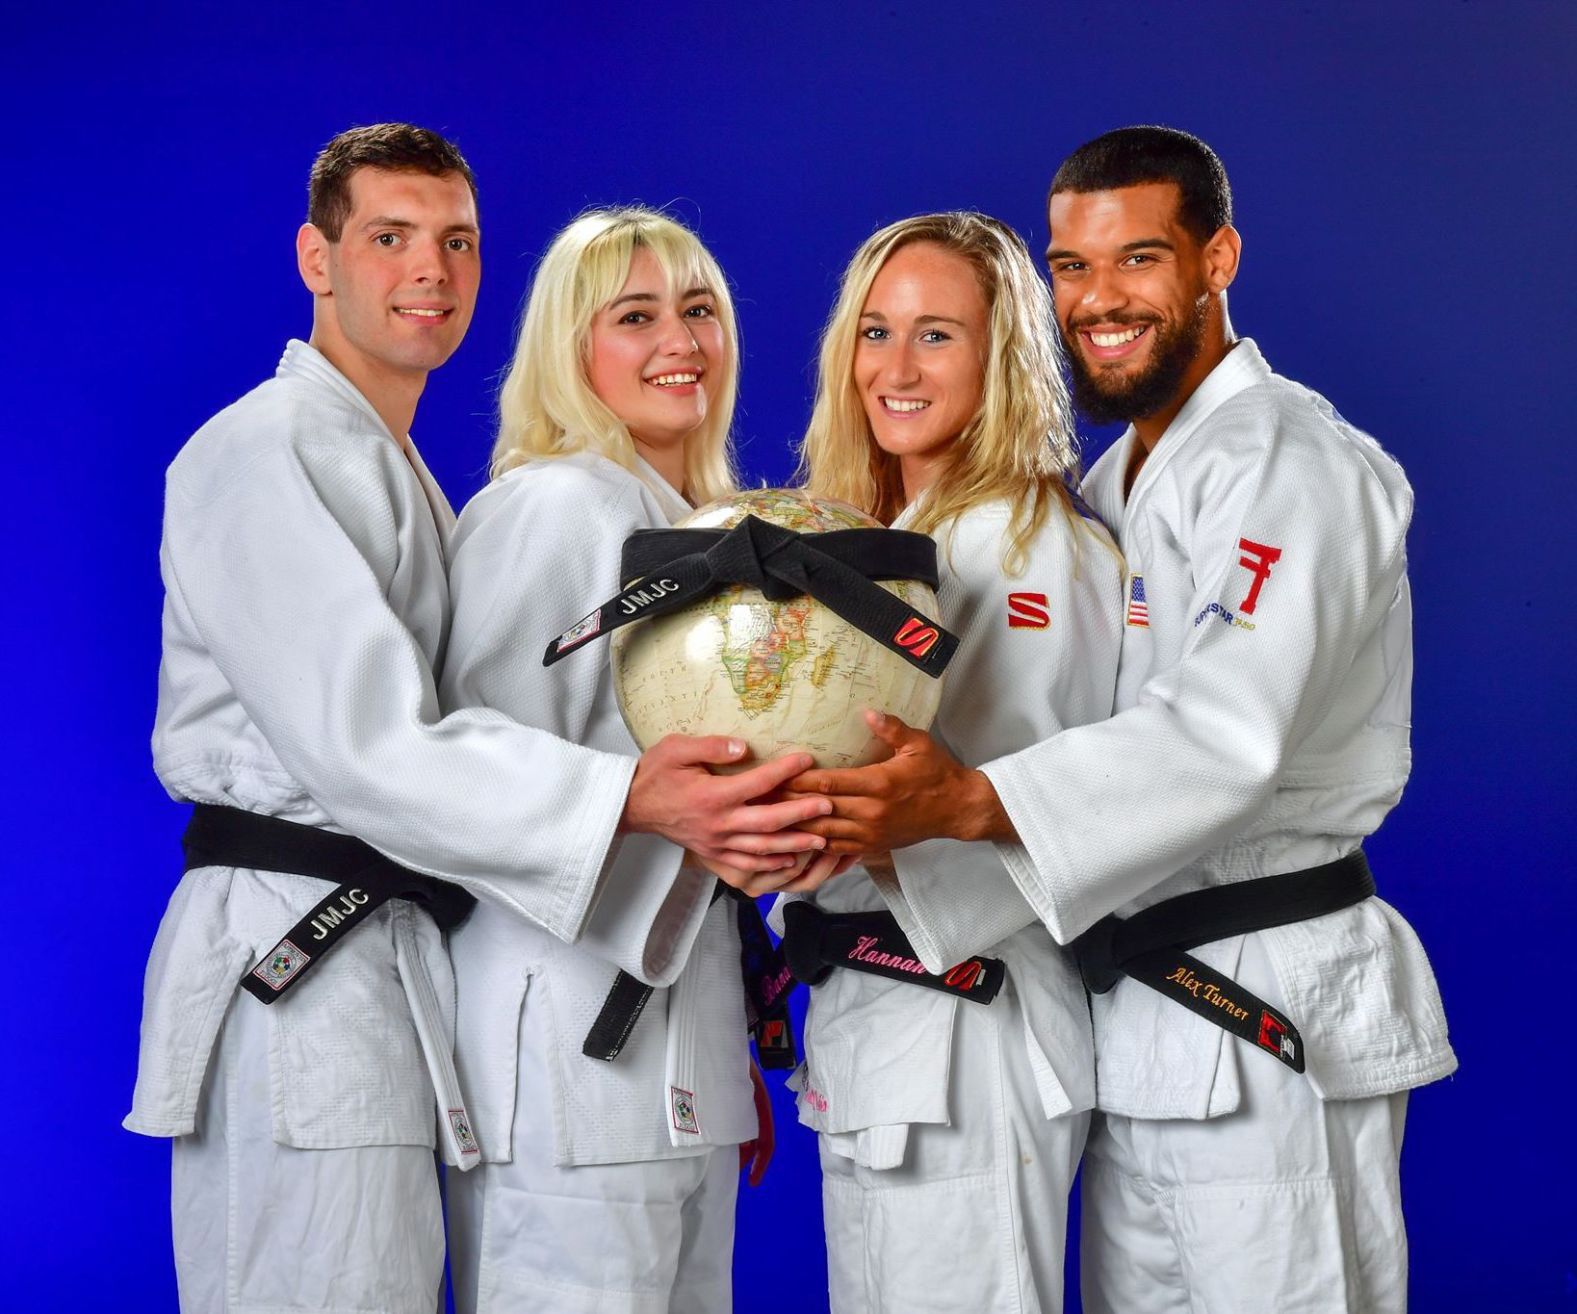 Four fly to Budapest for judo worlds